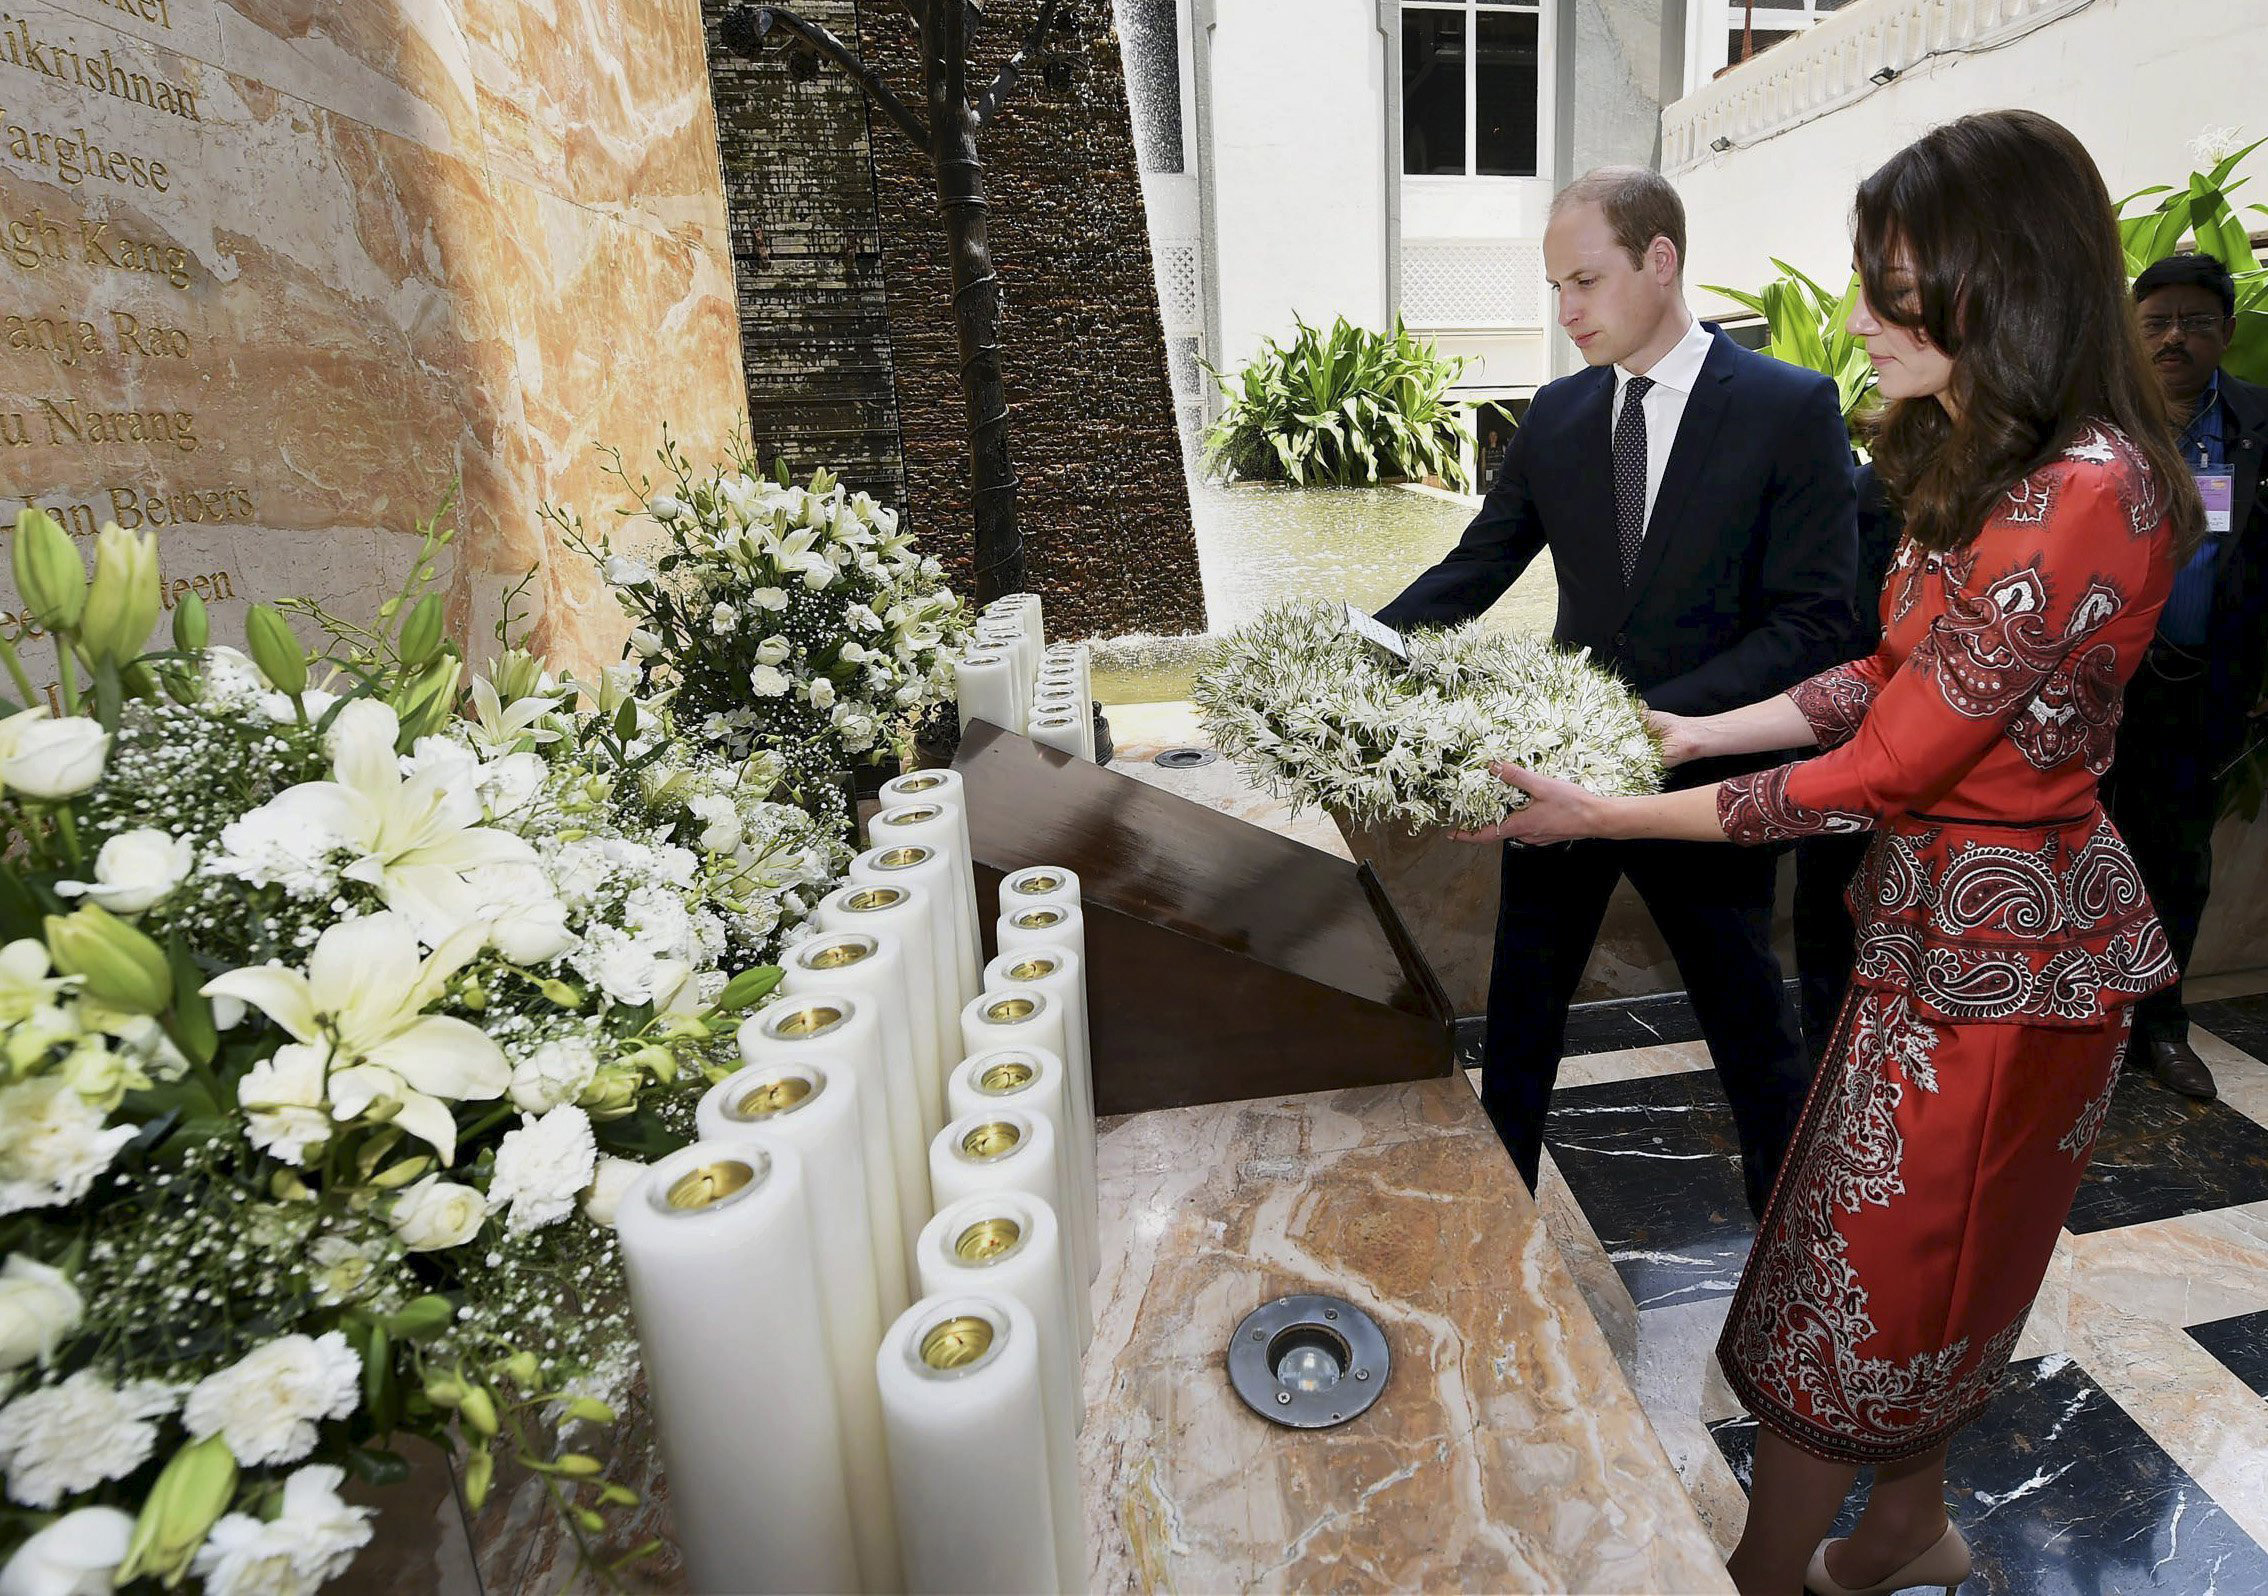 Prince William and Catherine hold a wreath as they pay their respects at the 26/11 memorial at the Taj Mahal Palace hotel, one of the sites of the 2008 attacks, in Mumbai, India, on April 10, 2016.